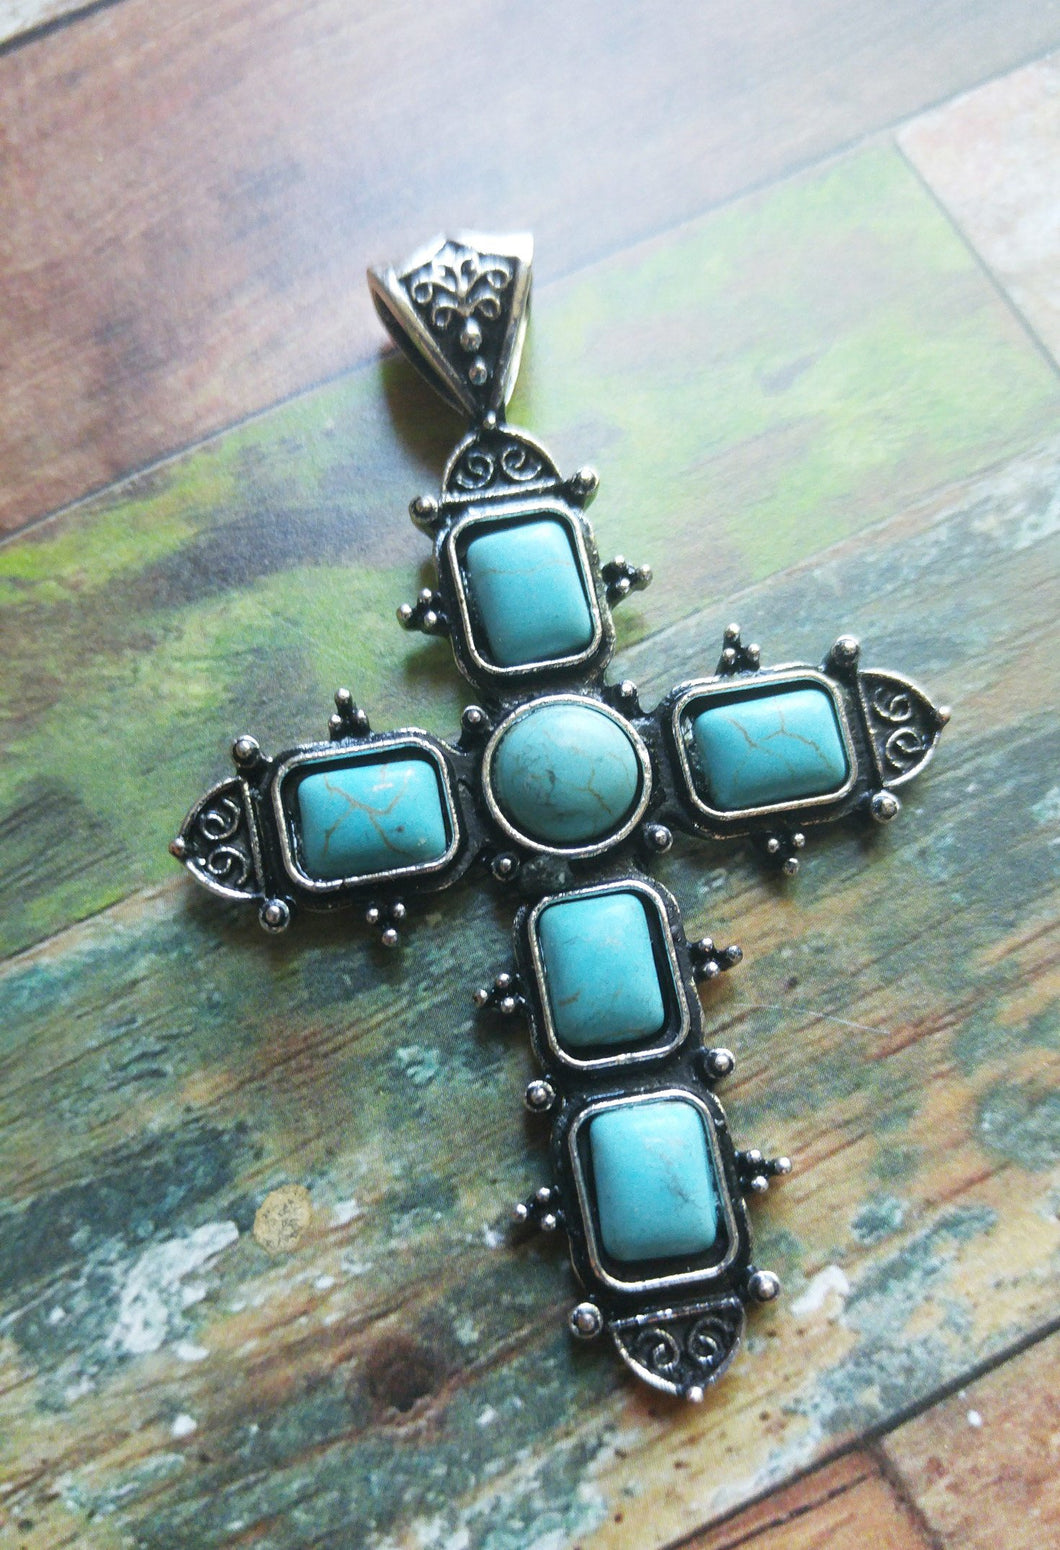 Large Cross Pendant Antiqued Silver Cross Charm Turquoise Cross Vintage Style Focal Pendant Religious Charm Ornate Cross 2 3/4